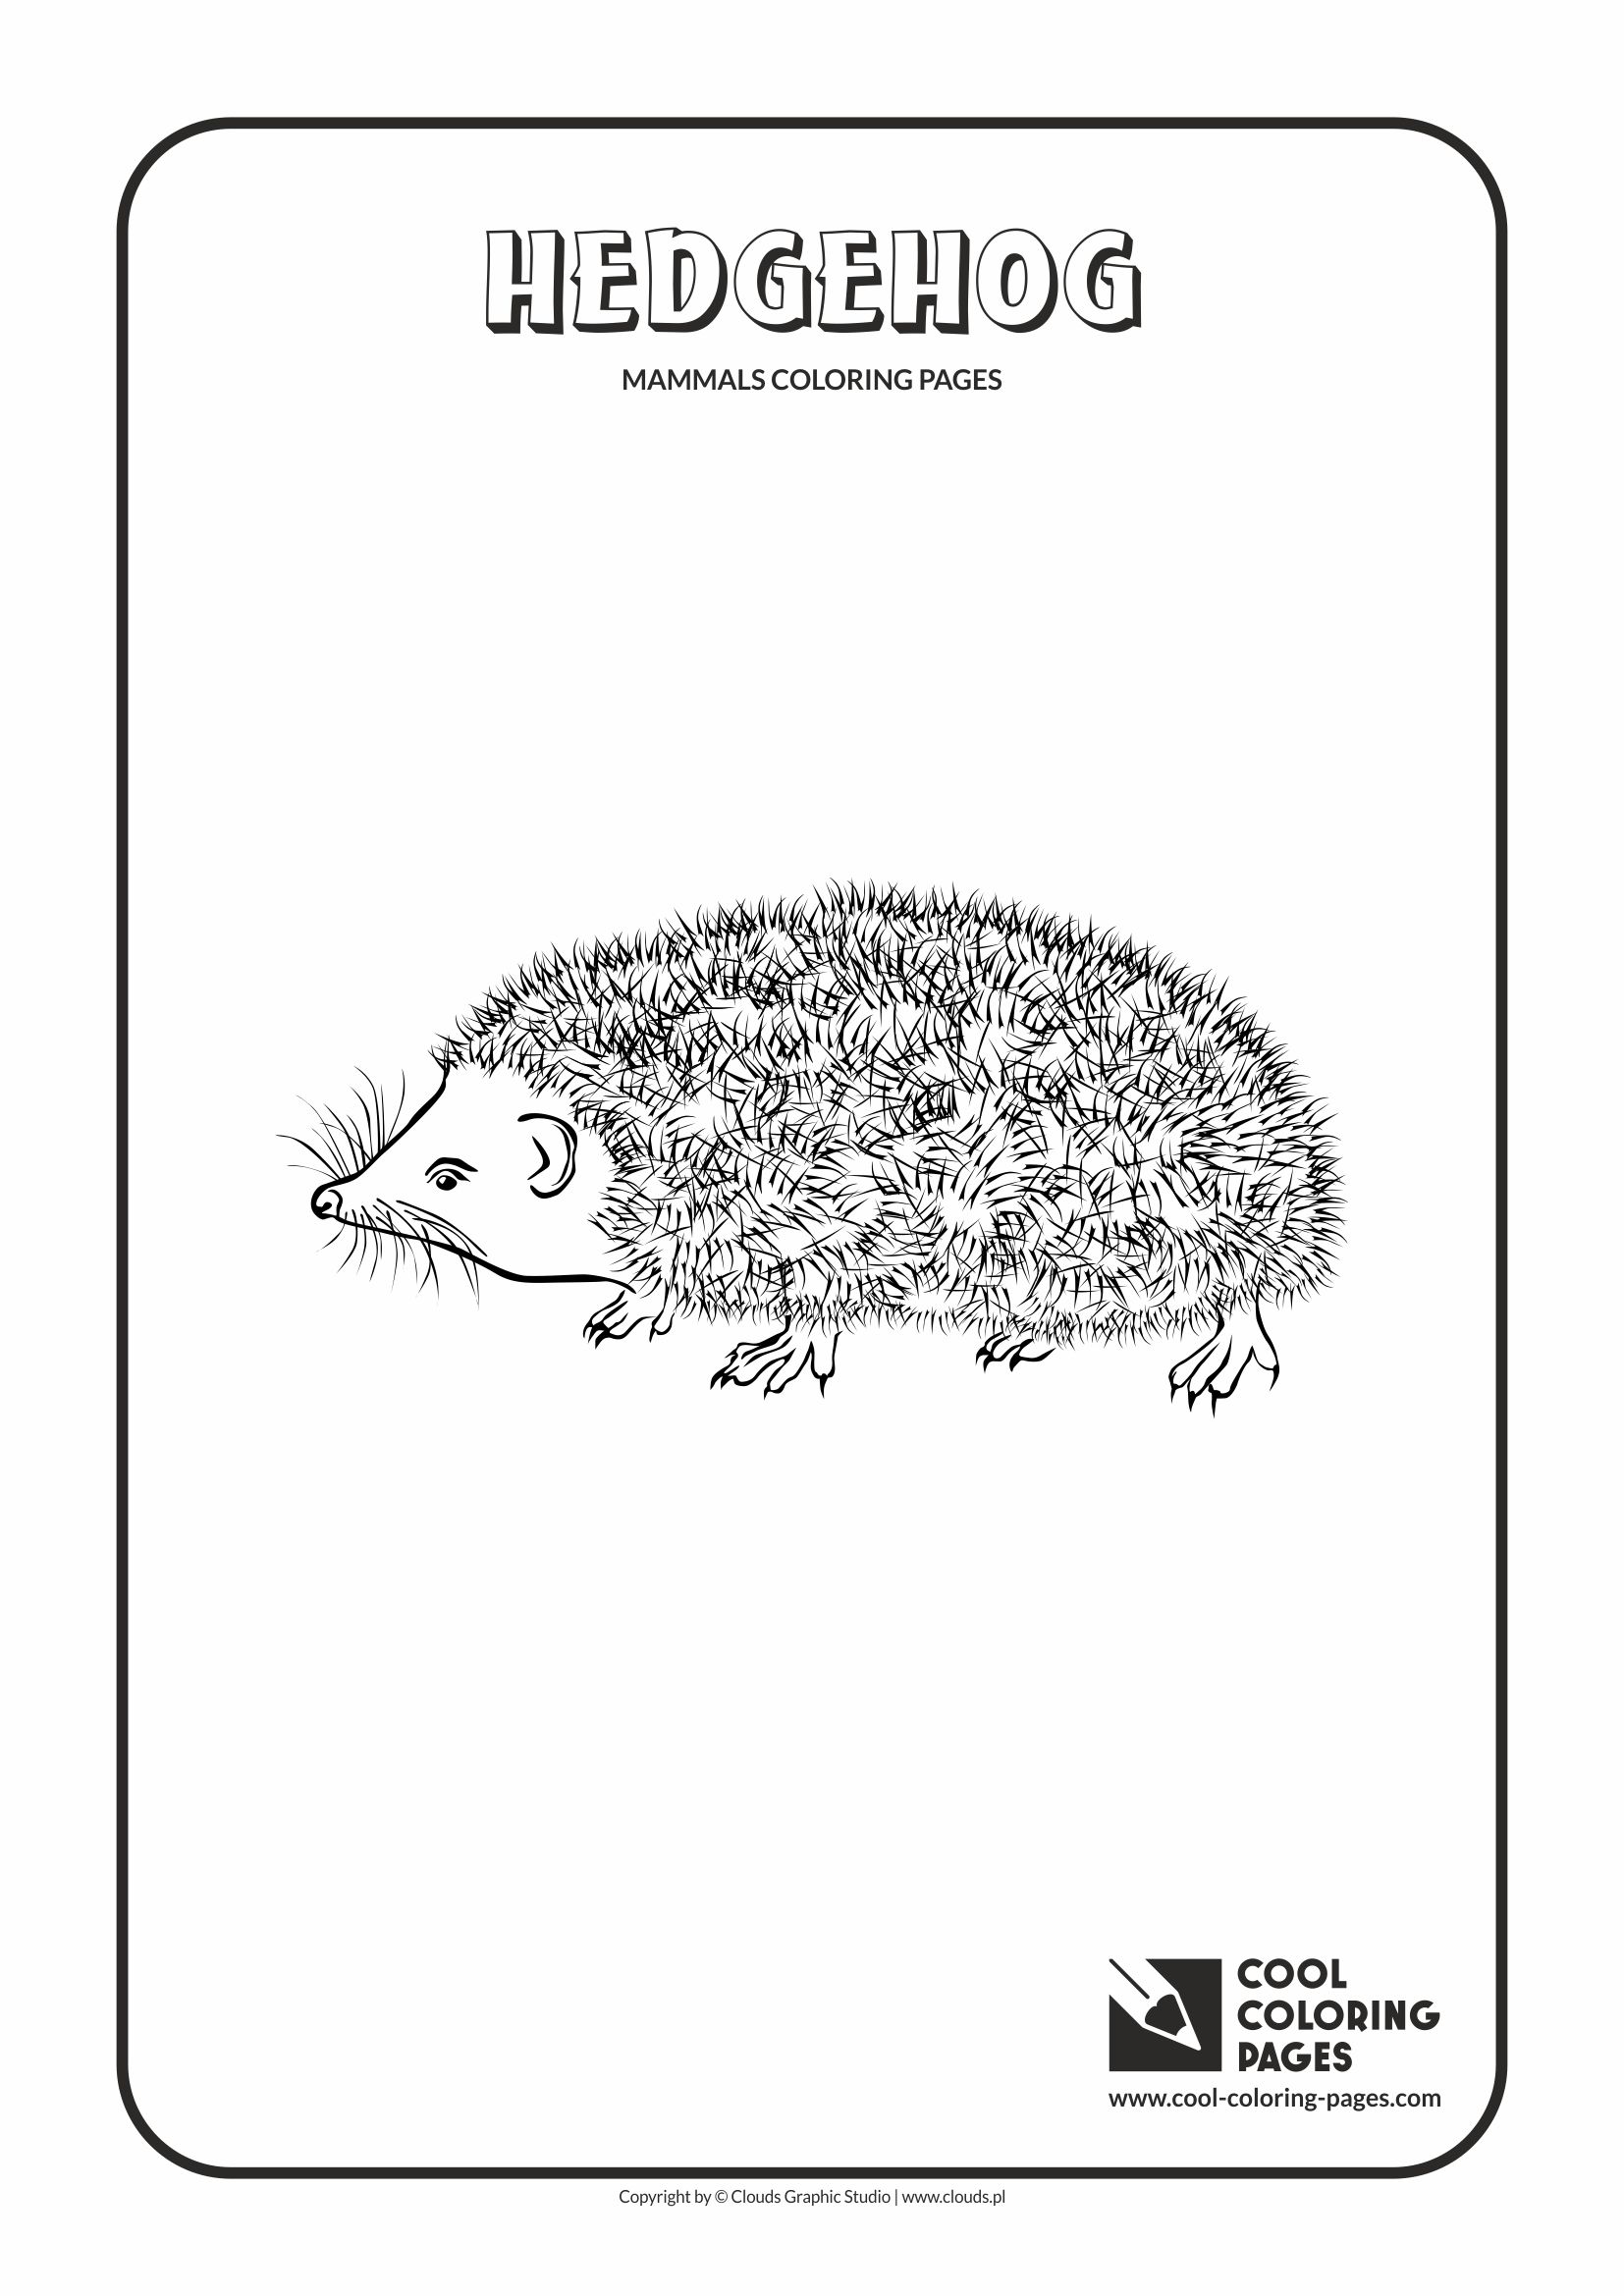 Cool Coloring Pages - Animals / Hedgehog / Coloring page with hedgehog